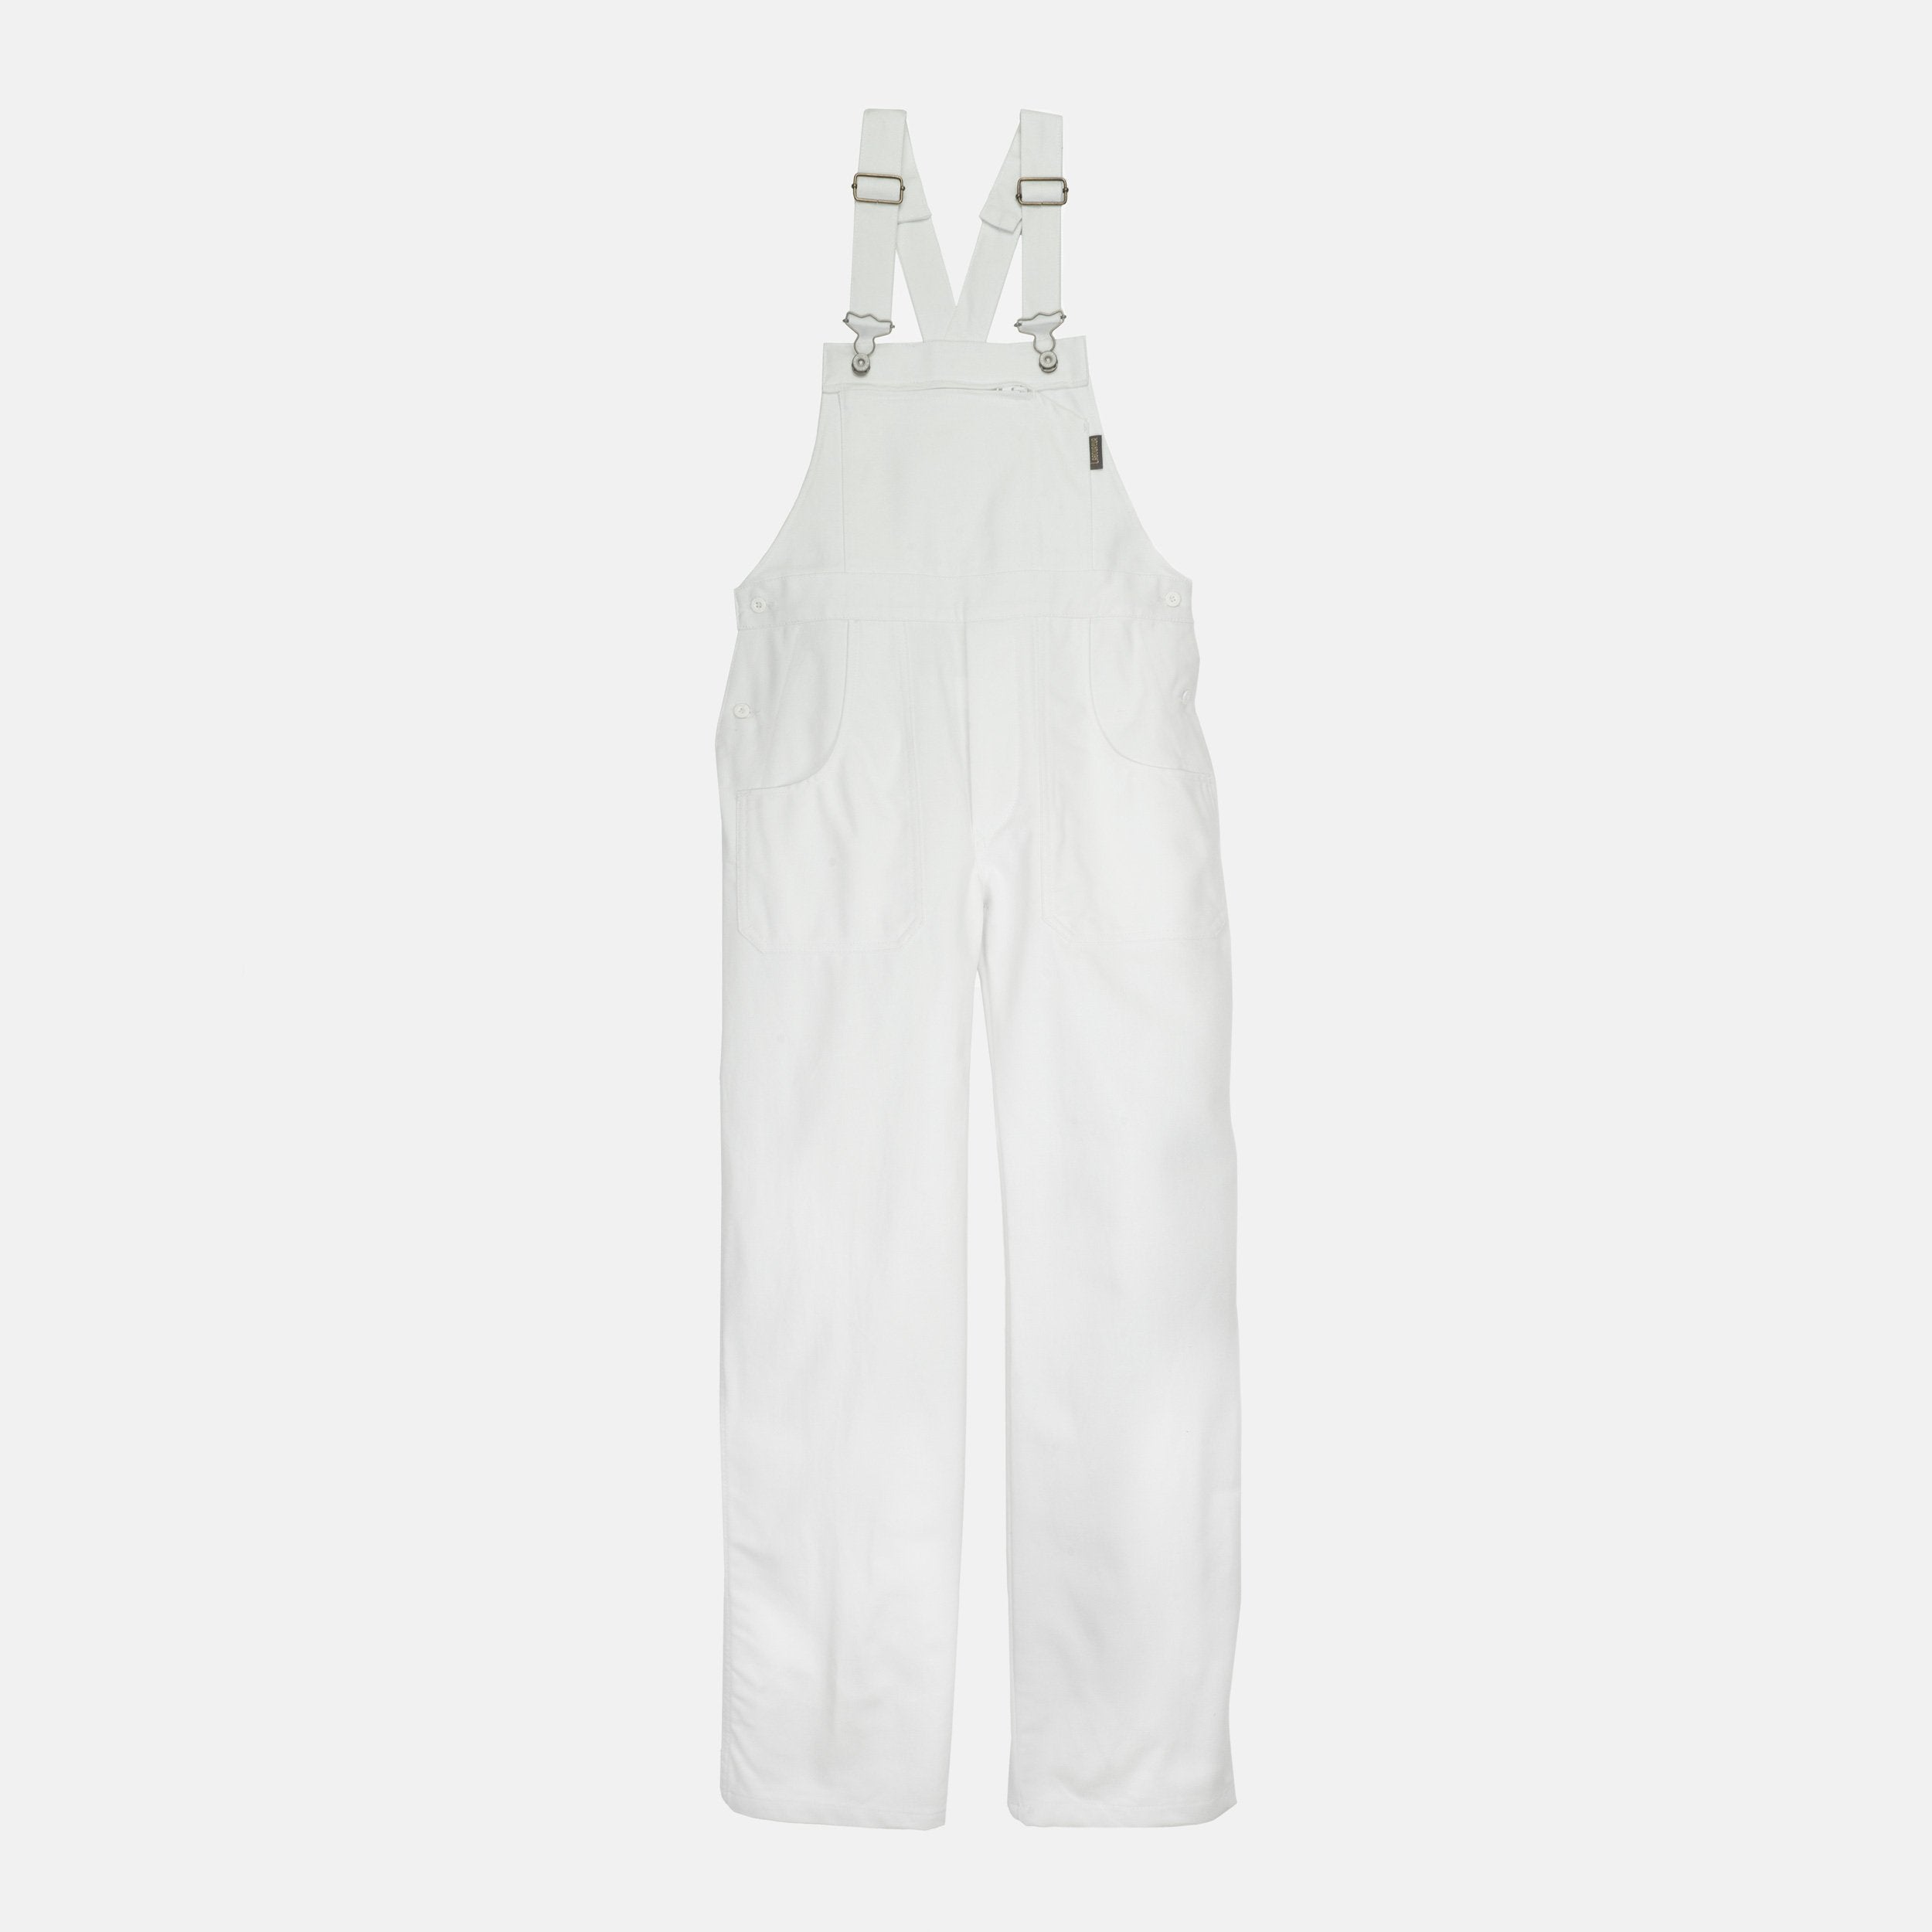 Le Laboureur for Gardenheir White Overalls in French Denim